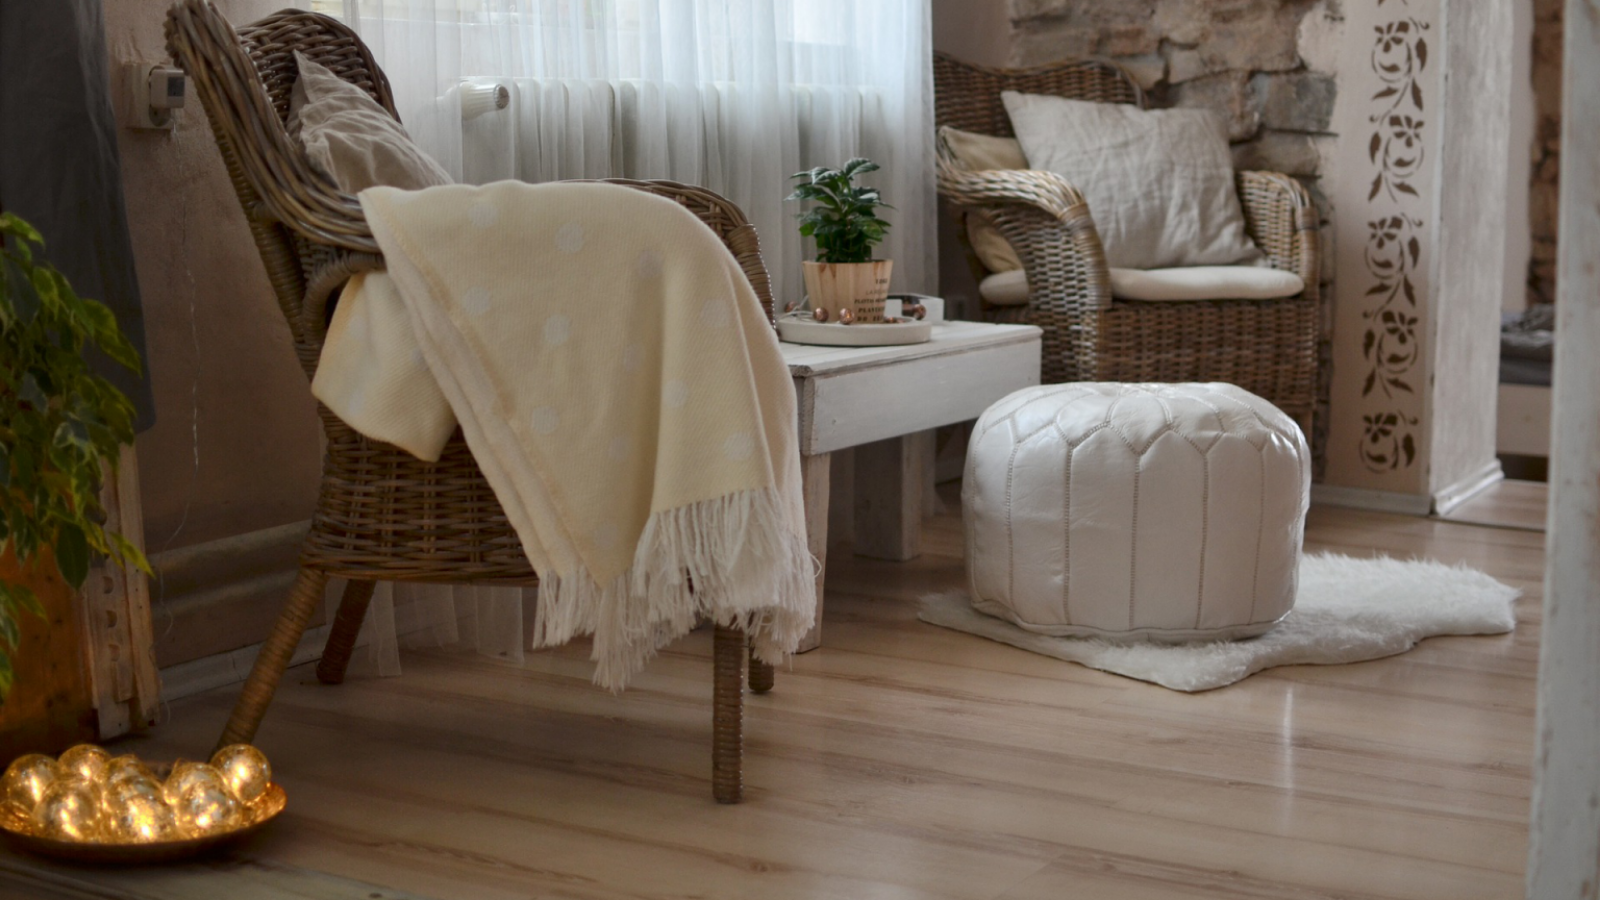 Transform your house into a home you love with Hygge.